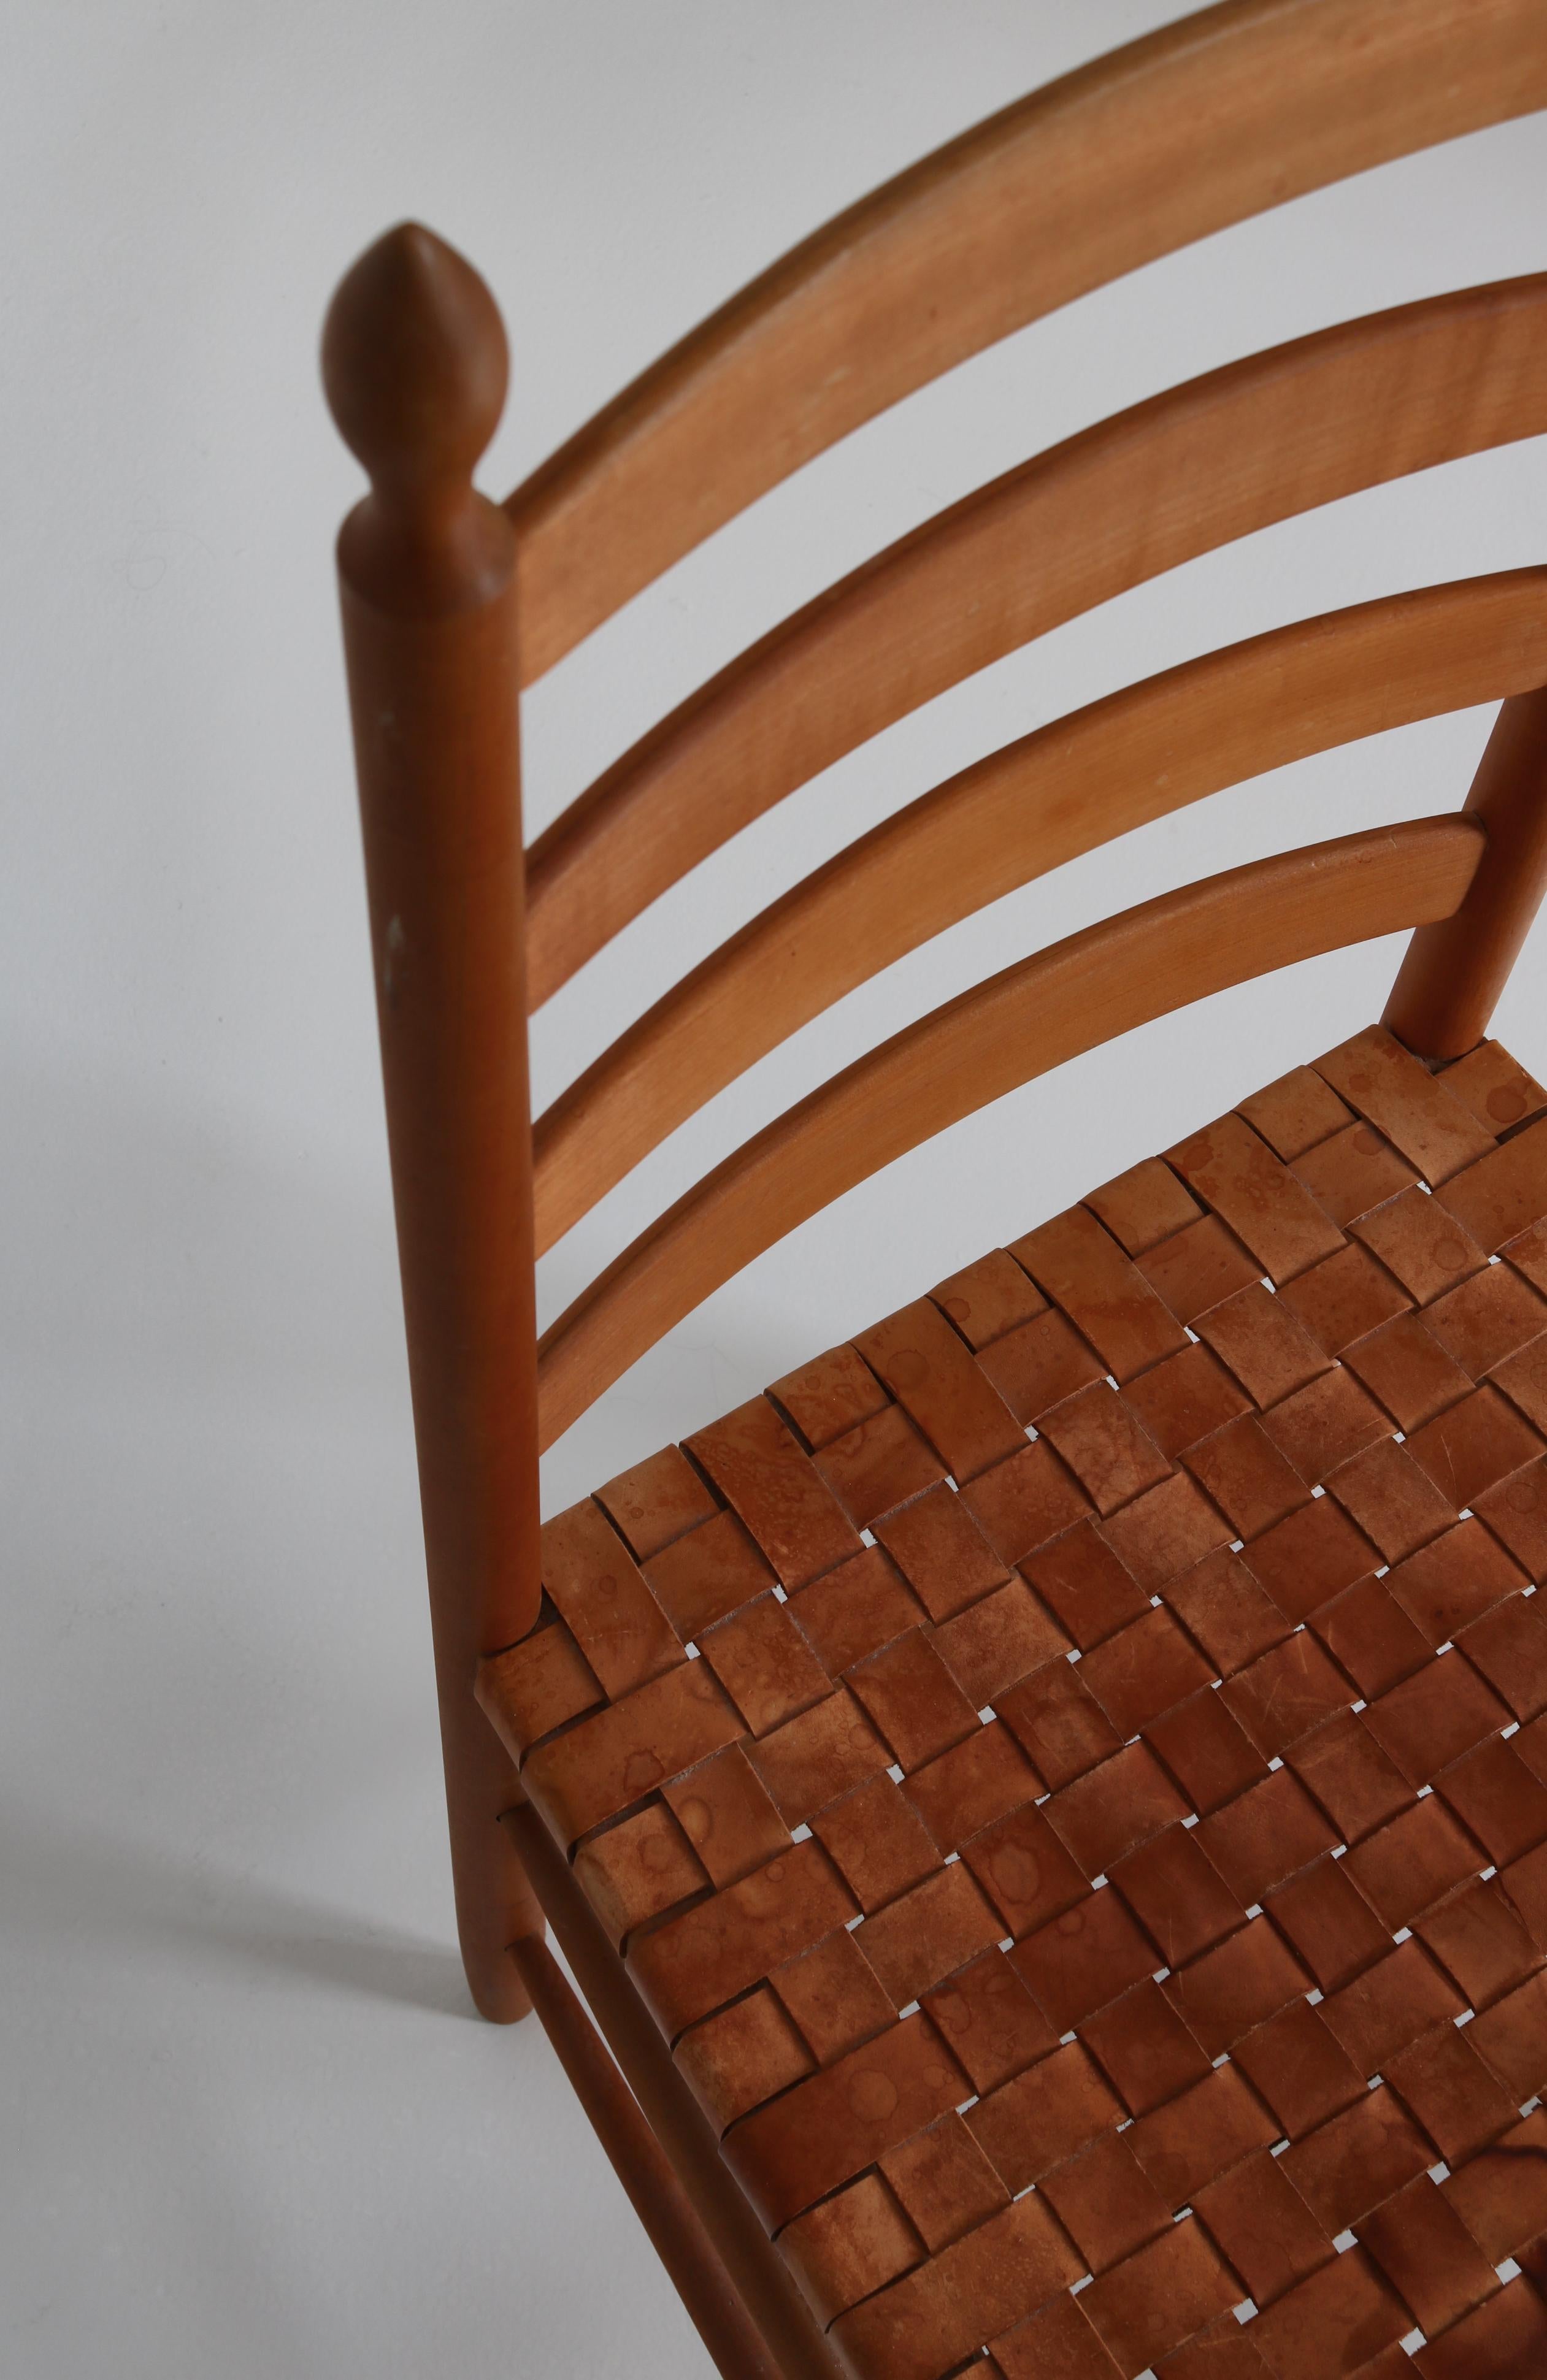 Vintage Scandinavian Shaker Chair in Beech and Leather Seat, Denmark, 1960s For Sale 2